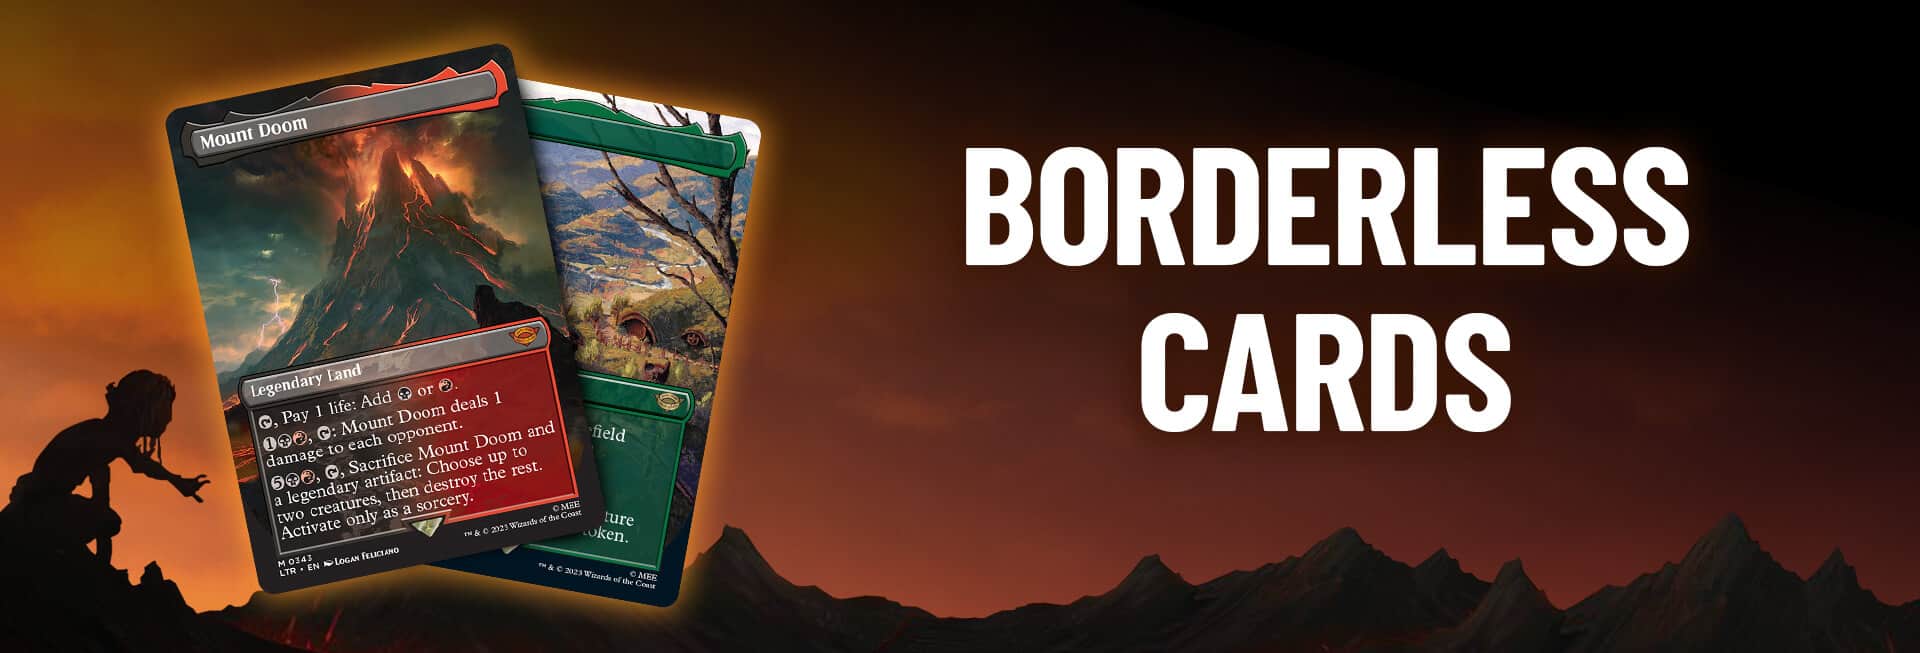 The Lord of the Rings comes to Magic: The Gathering with Tales of  Middle-earth - Xfire